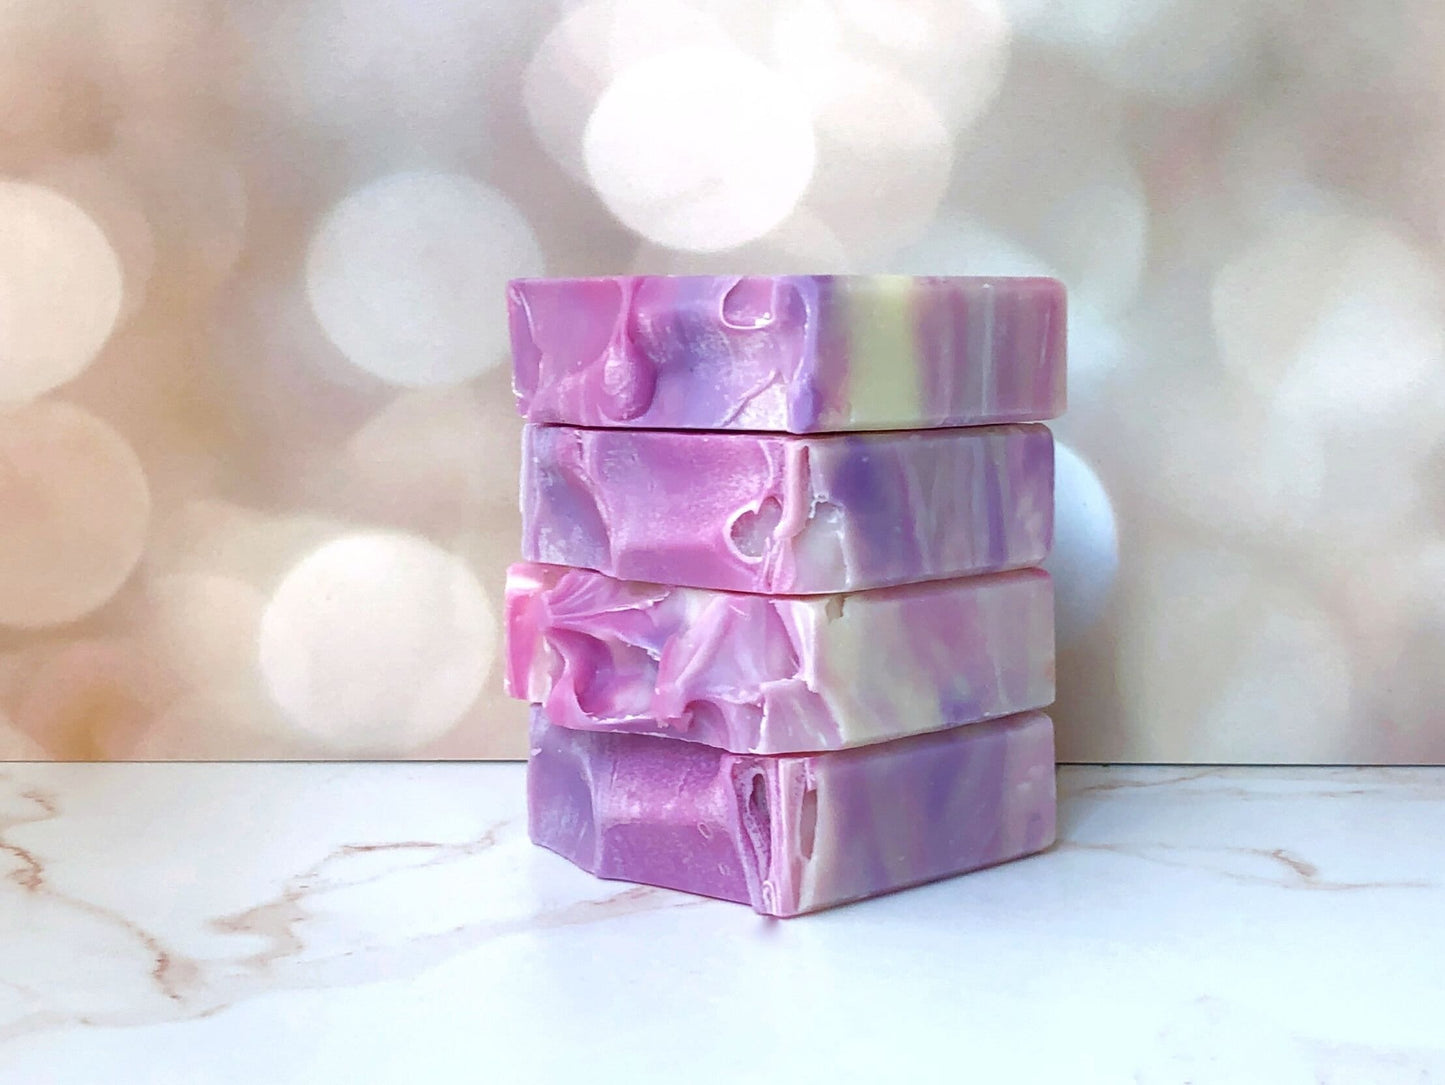 Stack of 4 rectangular soap bars sitting atop a marble countertop and a blurred fairy light background.  Soap is lavender and grape purple color swirled in a beige base.